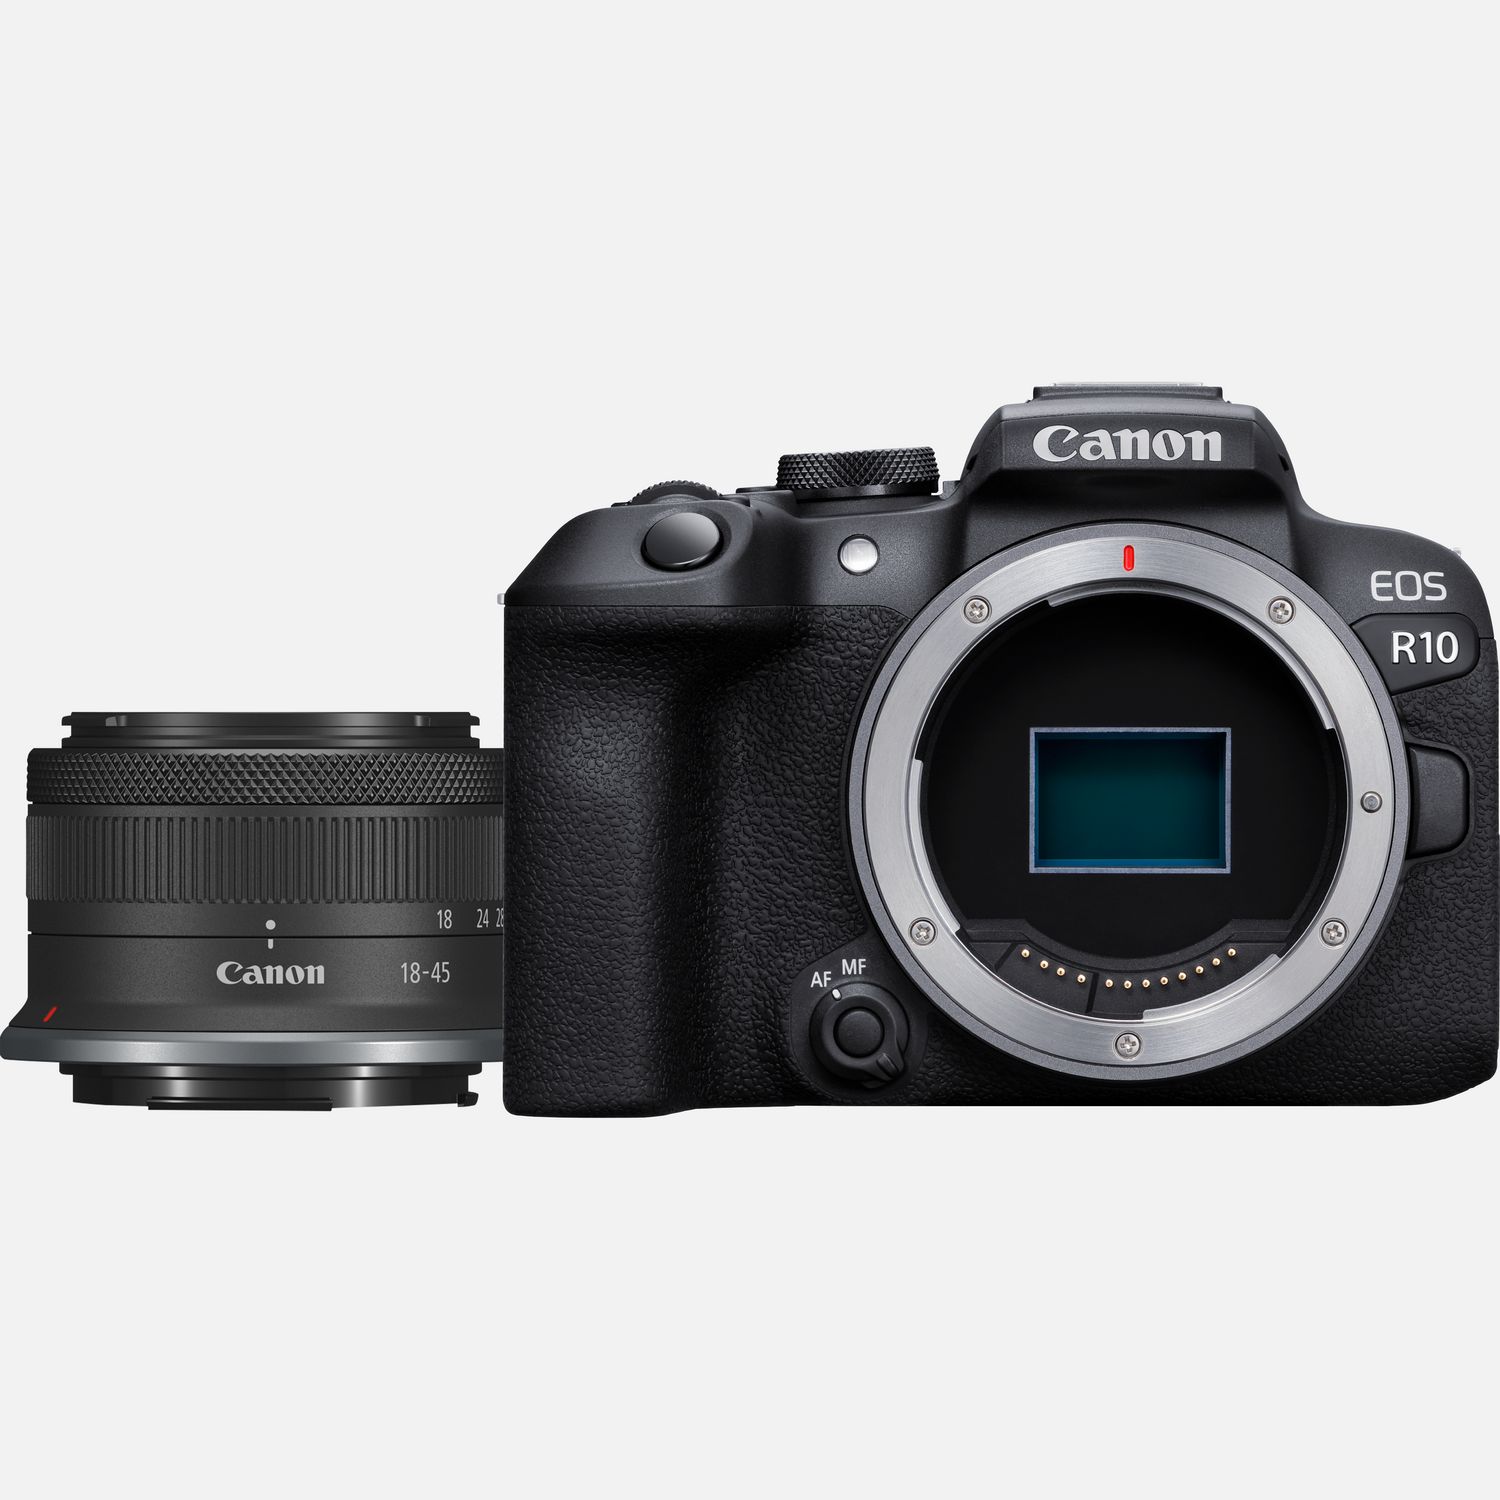 Buy Canon EOS R10 Mirrorless Camera + RF-S 18-45mm F4.5-6.3 IS STM Lens in  Wi-Fi Cameras — Canon Ireland Store